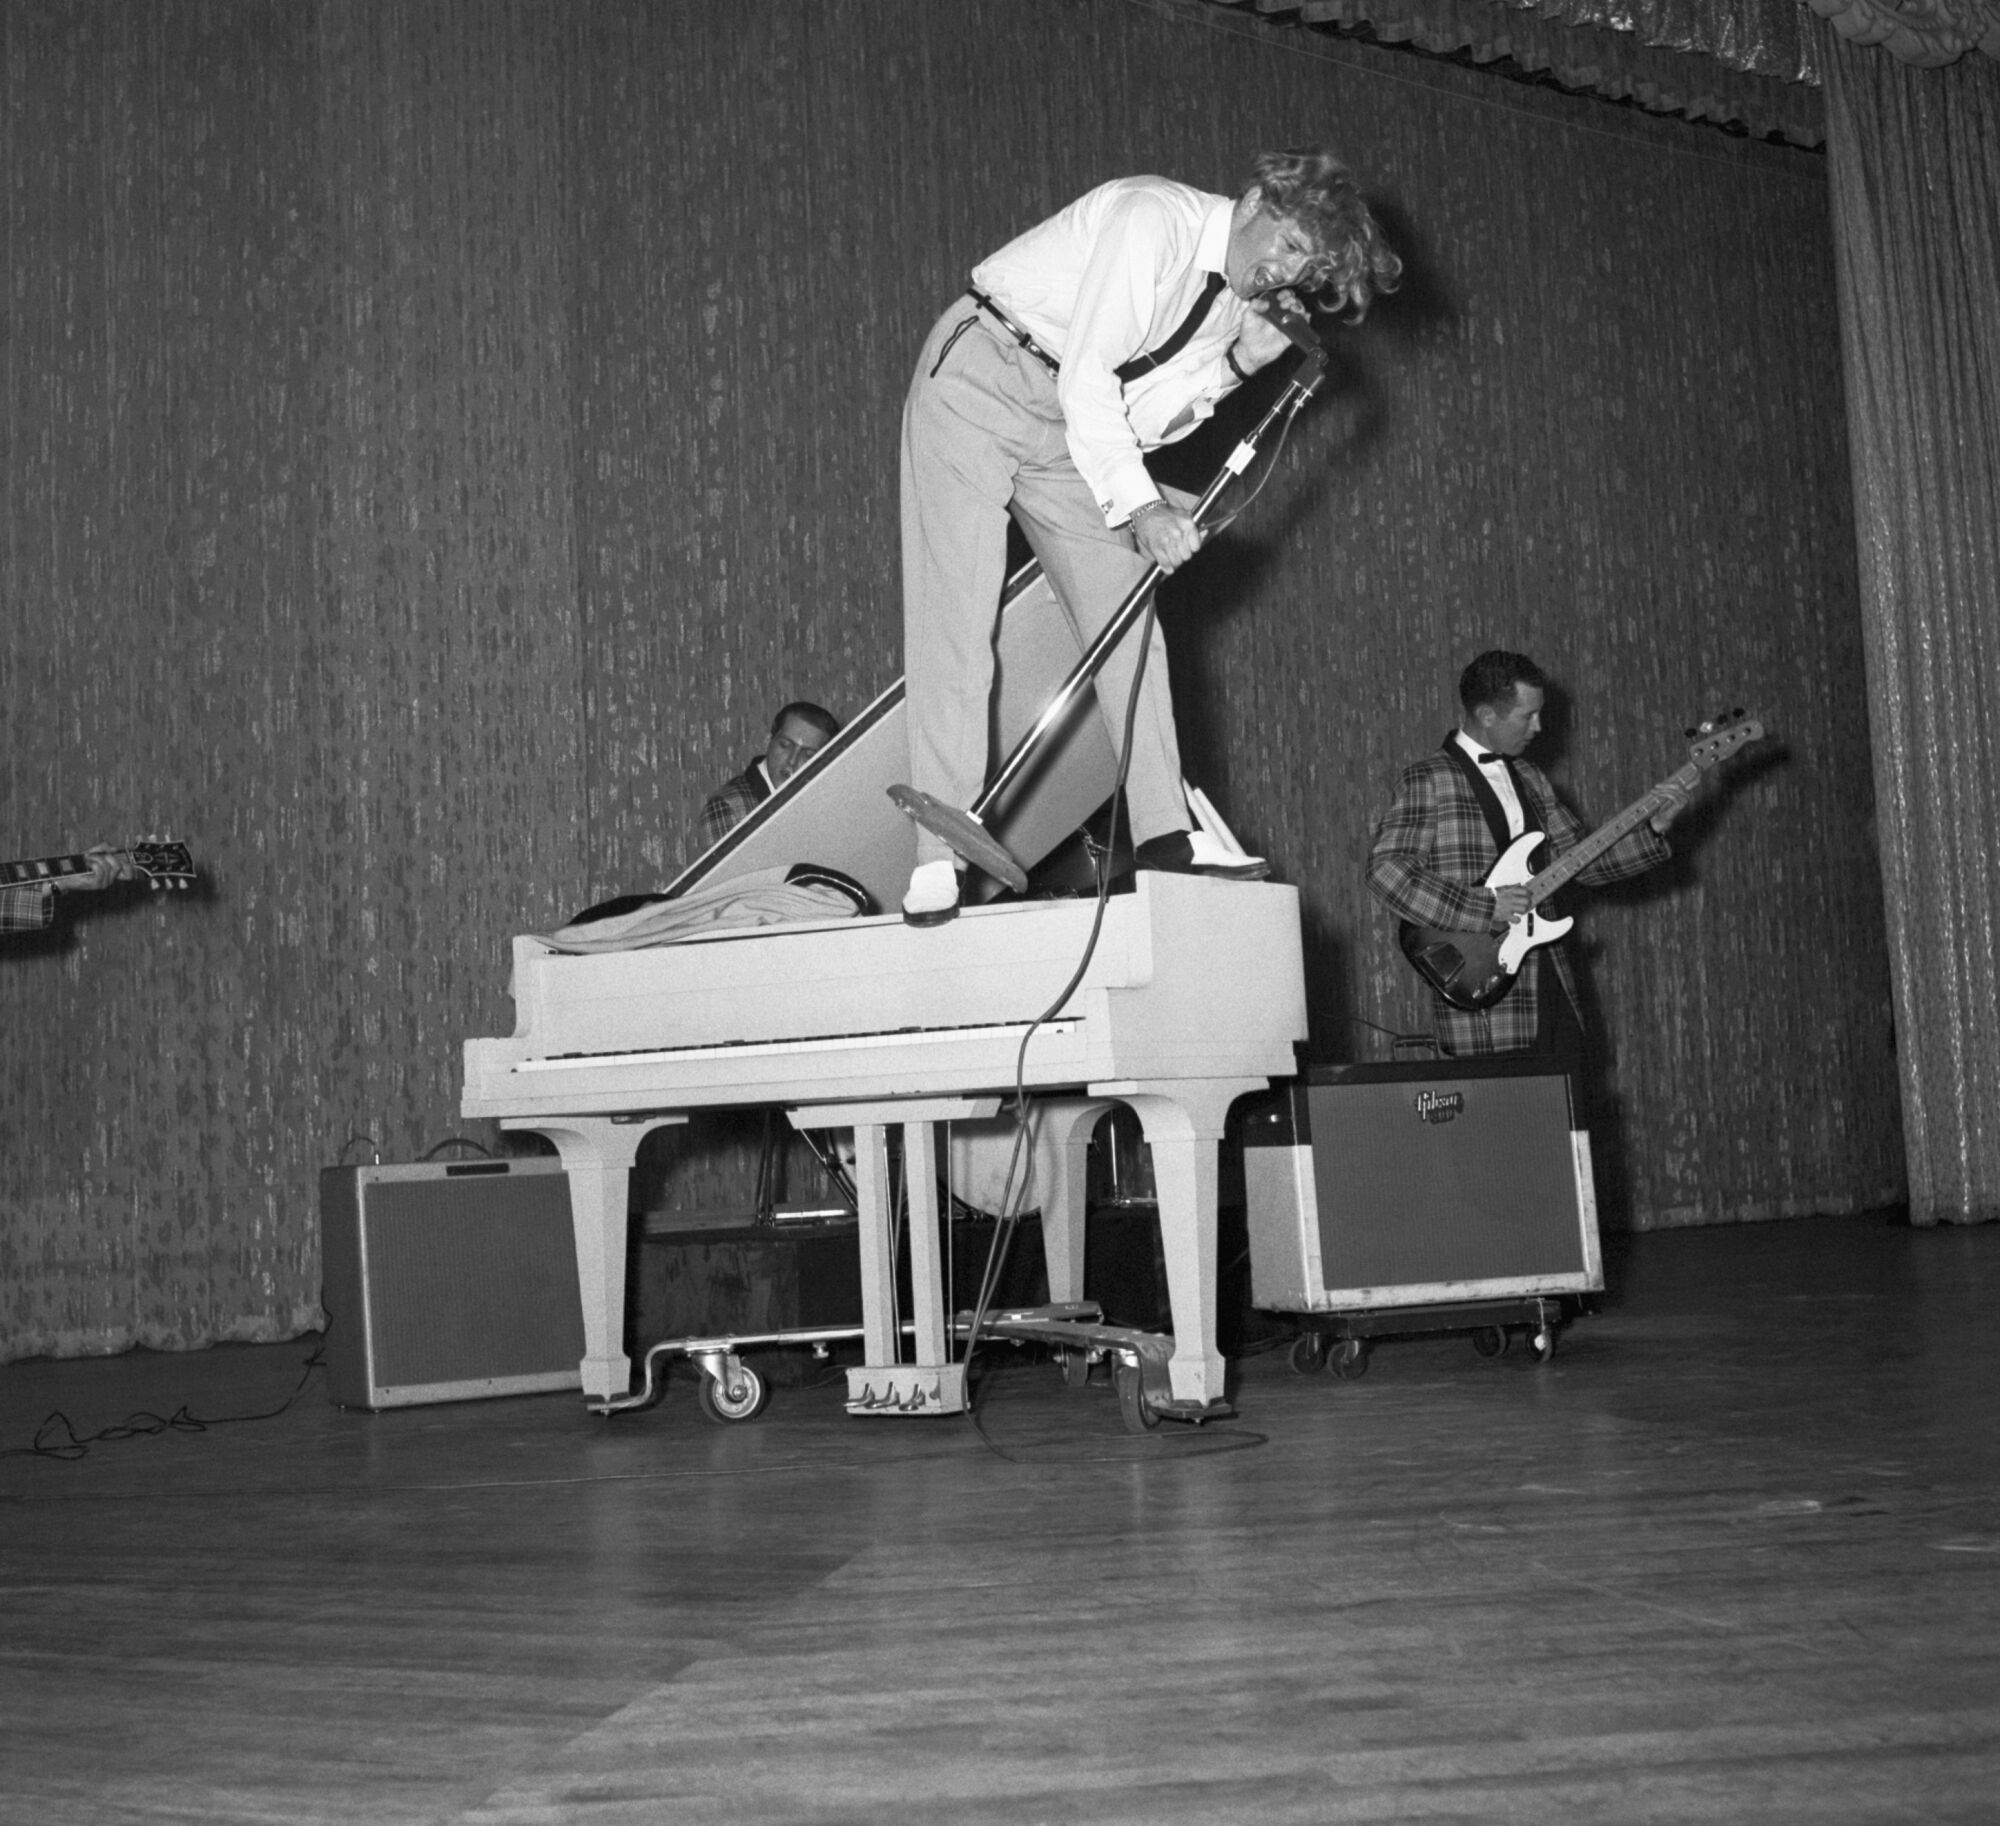 Rock 'n' roll singer Jerry Lee Lewis stands on a piano and gives an enthusiastic performance in June 1958.